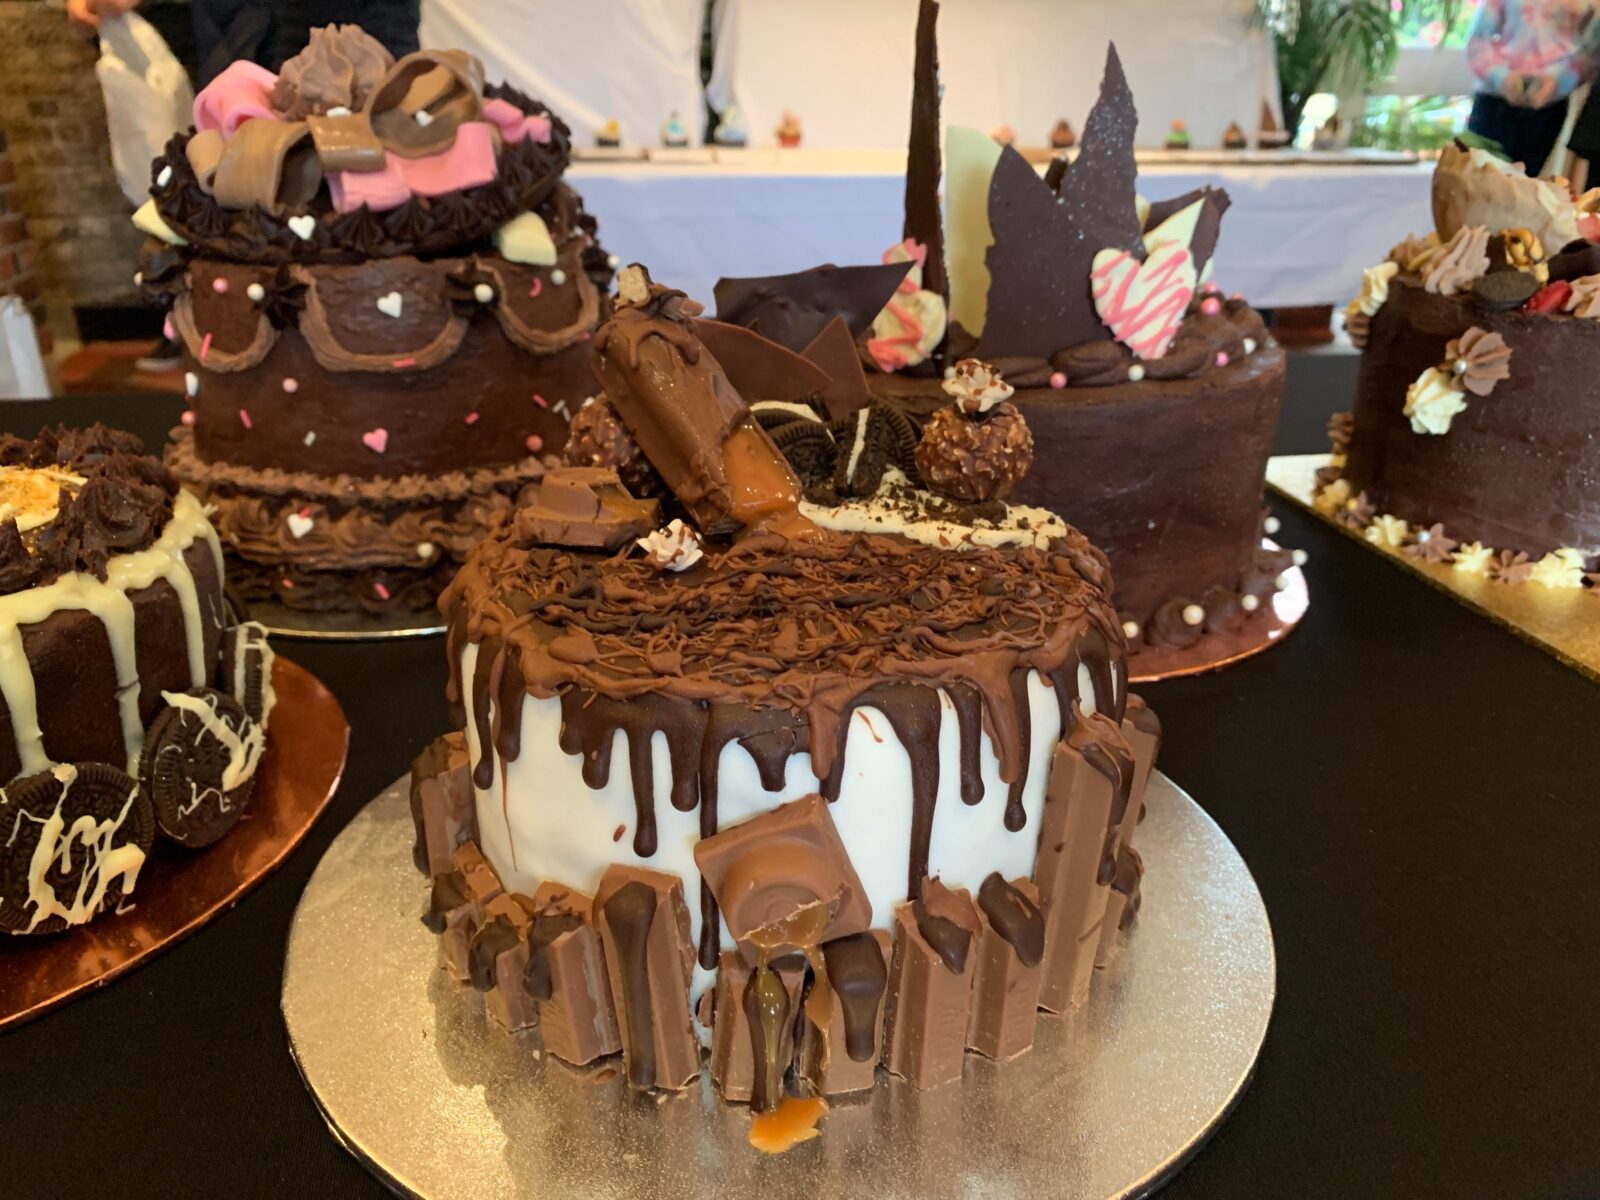 Decorated Chocolate Cake Competition